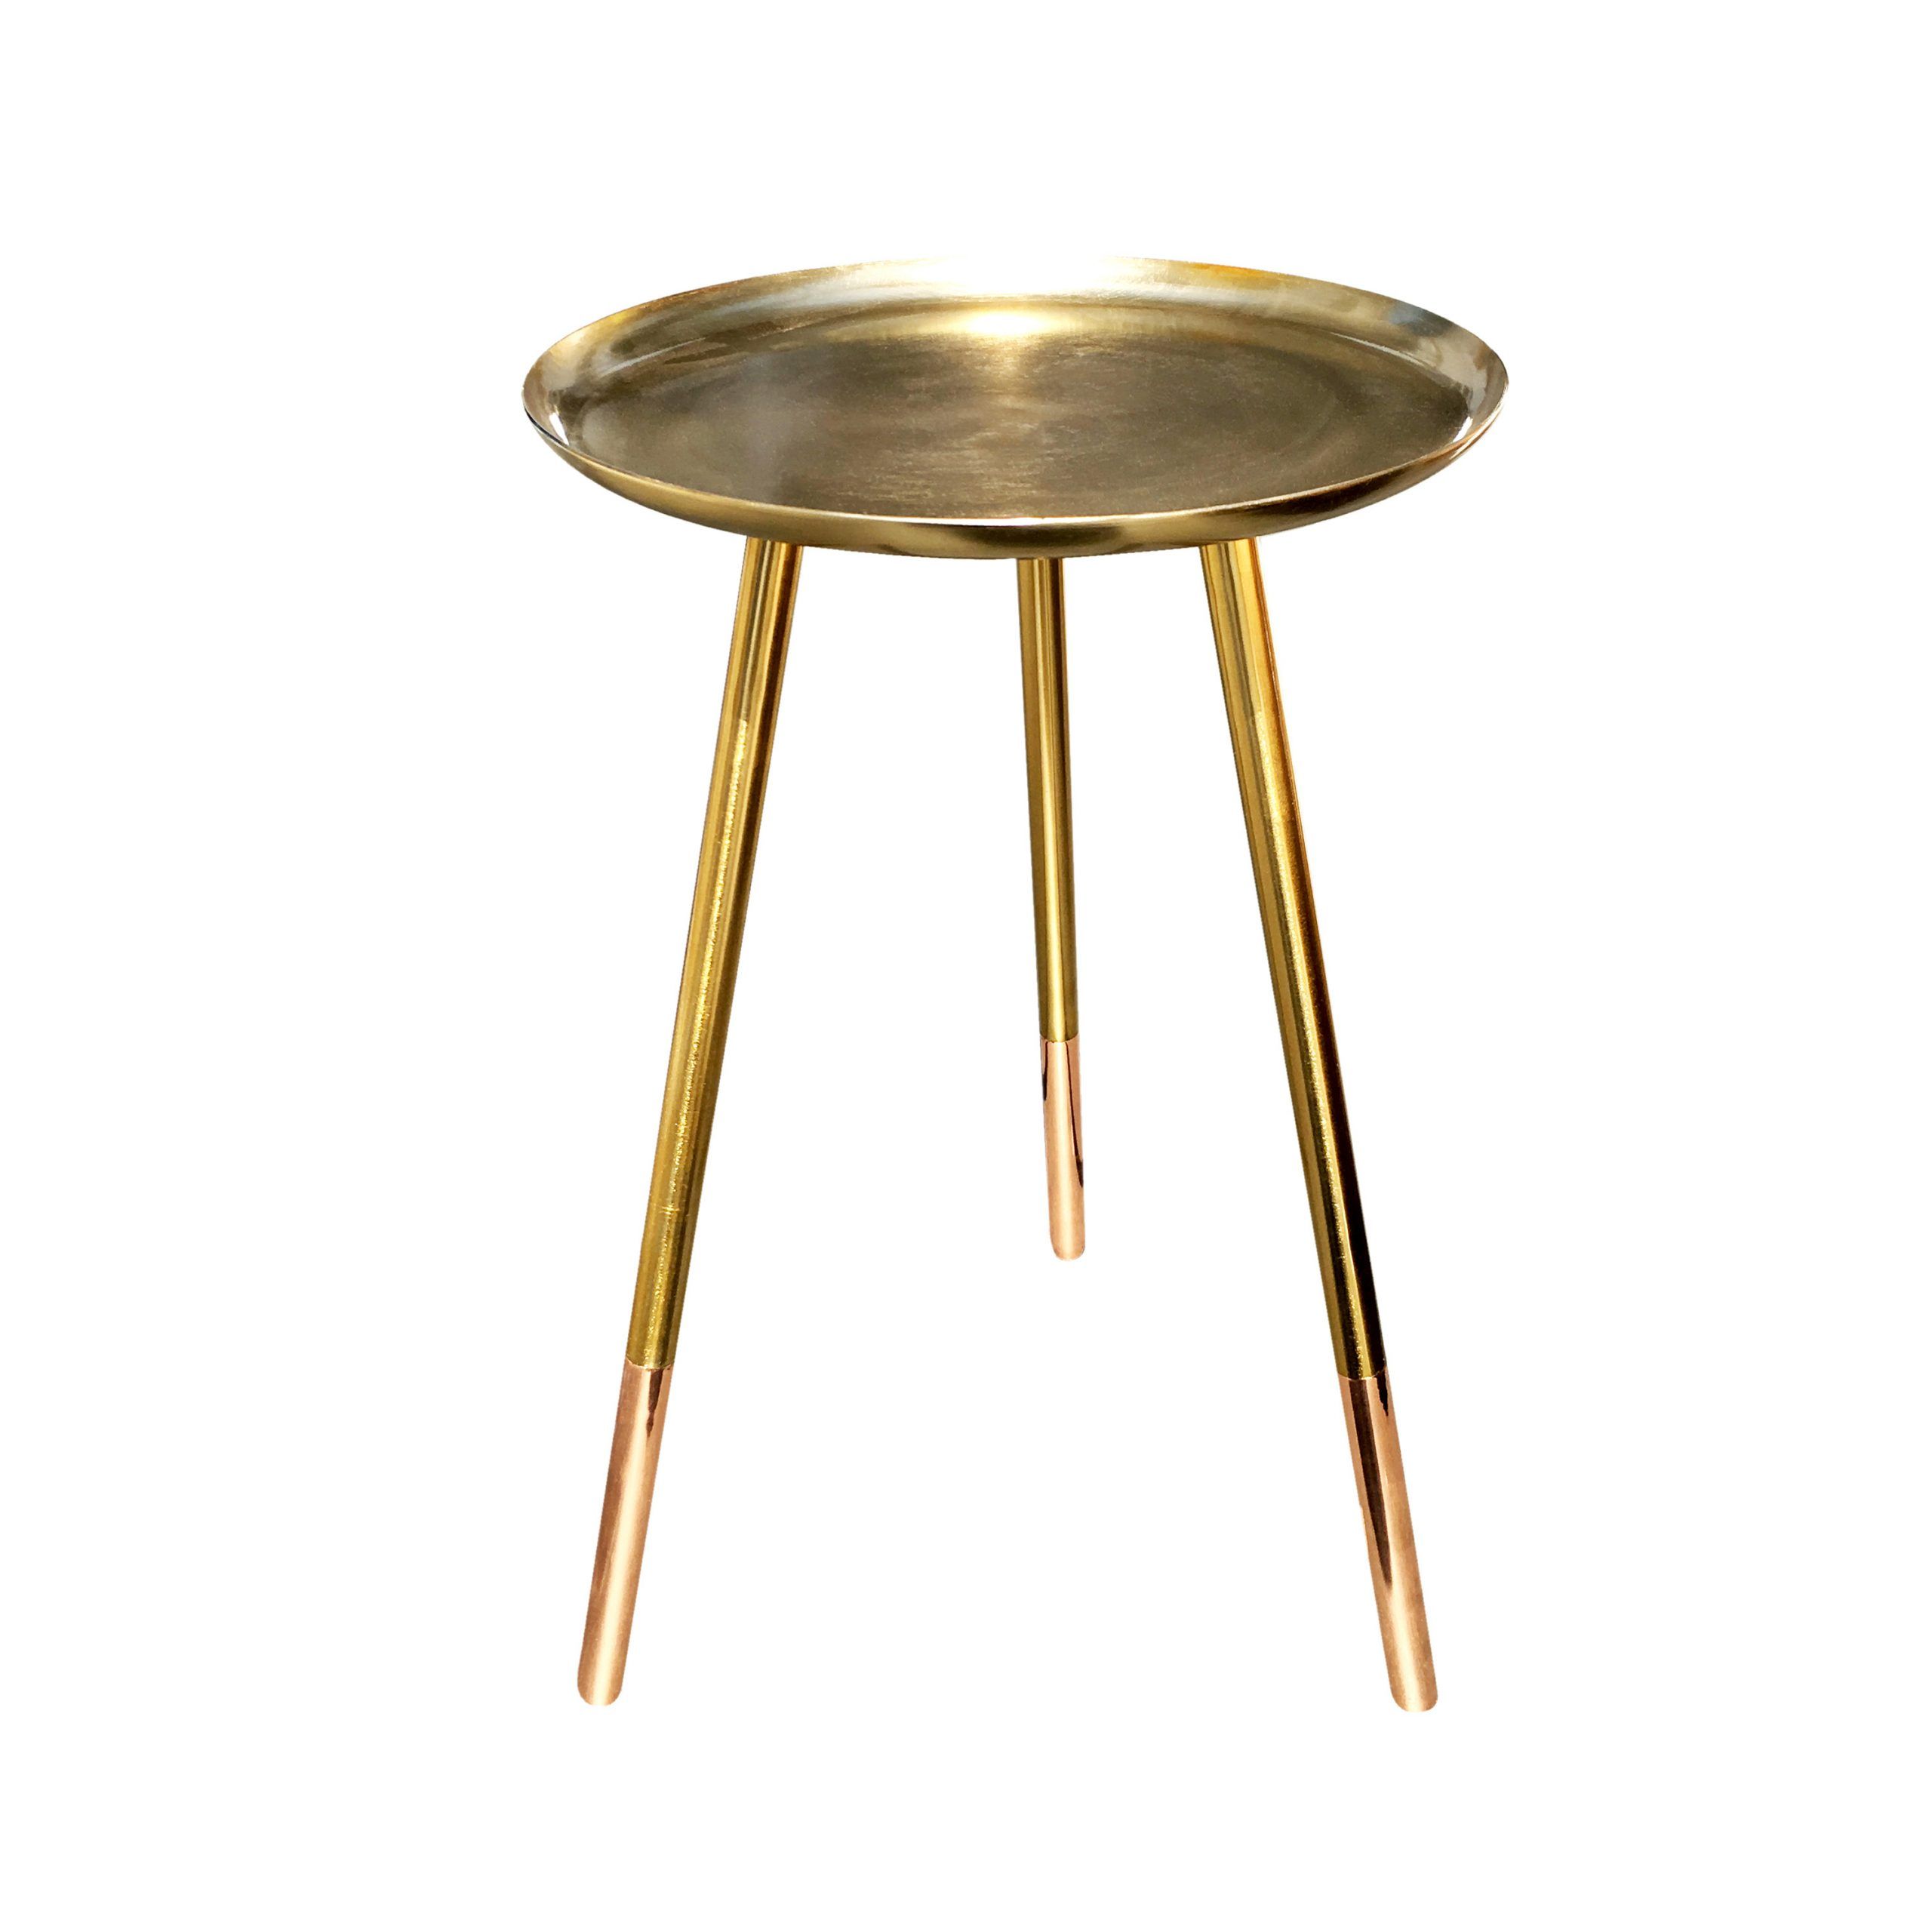 Round Brass Table With Tripod Copper Legs – A Little Arty For Trendy Console Tables With Tripod Legs (View 10 of 10)